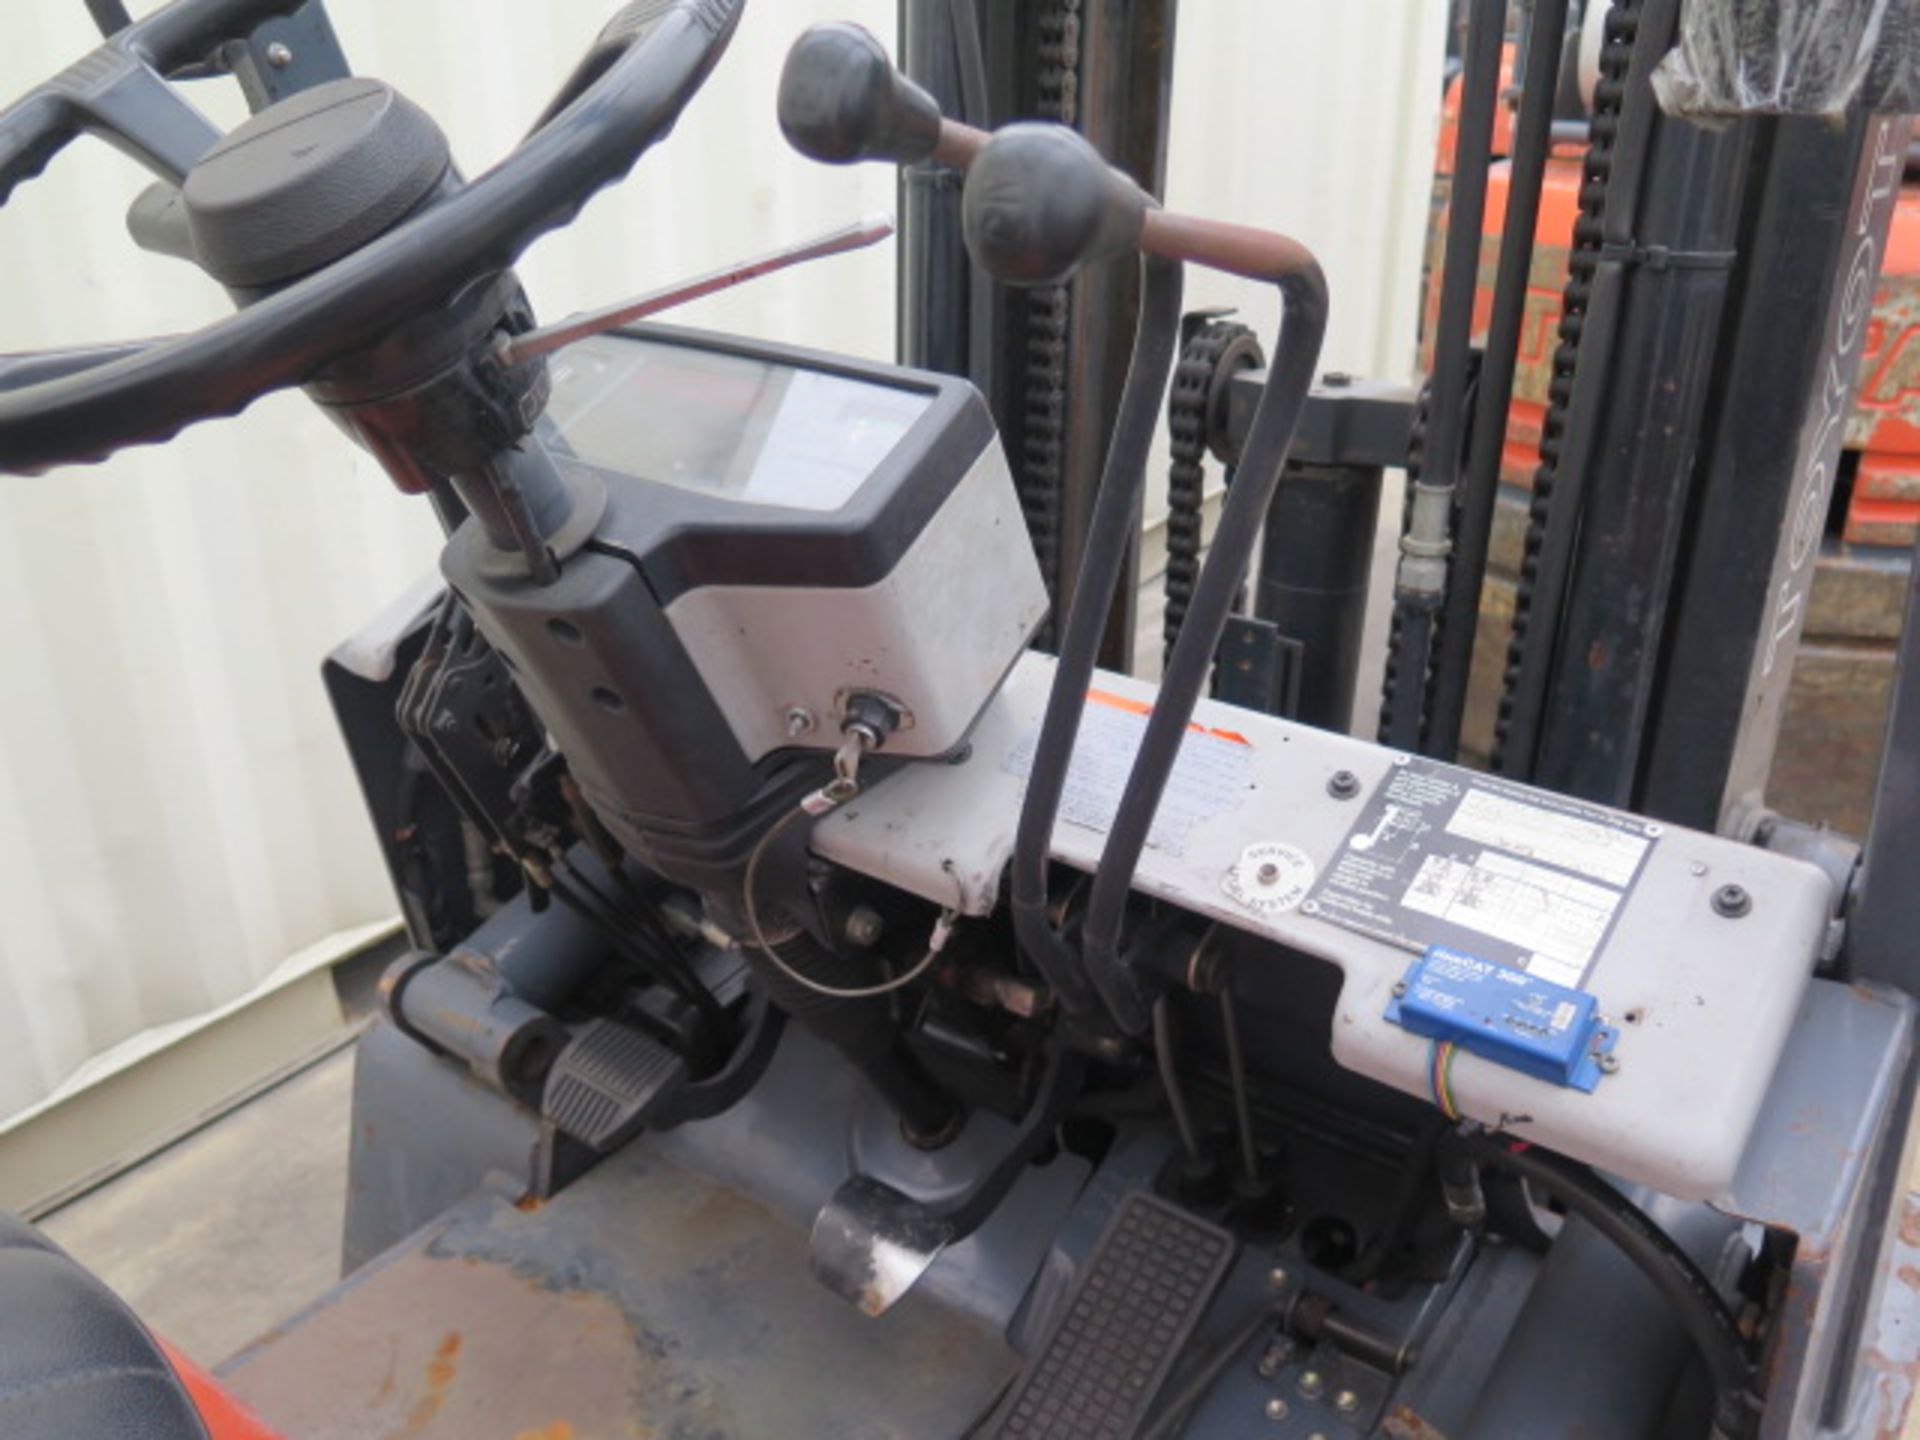 Toyota 5FGC25 5000 Lb Cap LPG Forklift s/n 5FGC25-85185 w/ 3-Stage Mast, 185" Lift Height, Cushion - Image 7 of 11